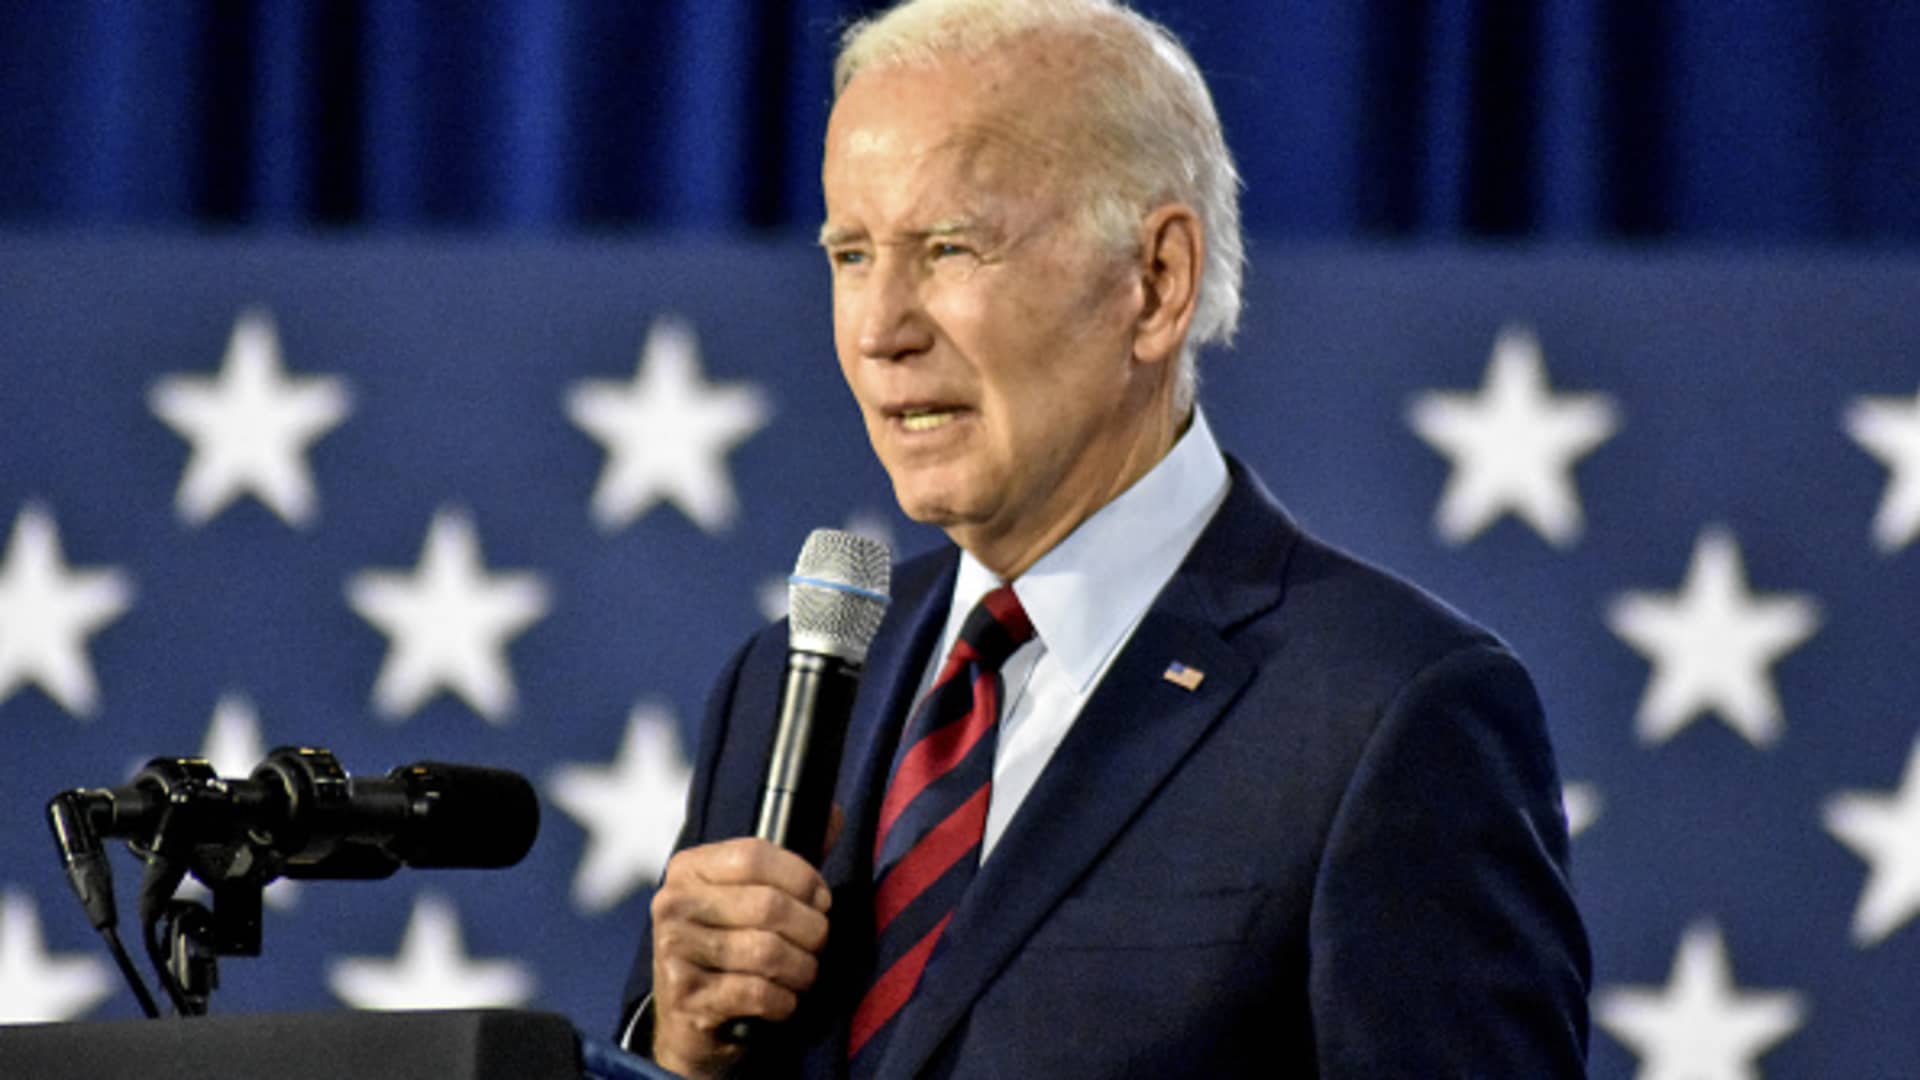 President Joe Biden delivers remarks on protecting Social Security and Medicare and lowering prescription drug costs in Hallandale Beach, Florida, on Nov. 1, 2022.